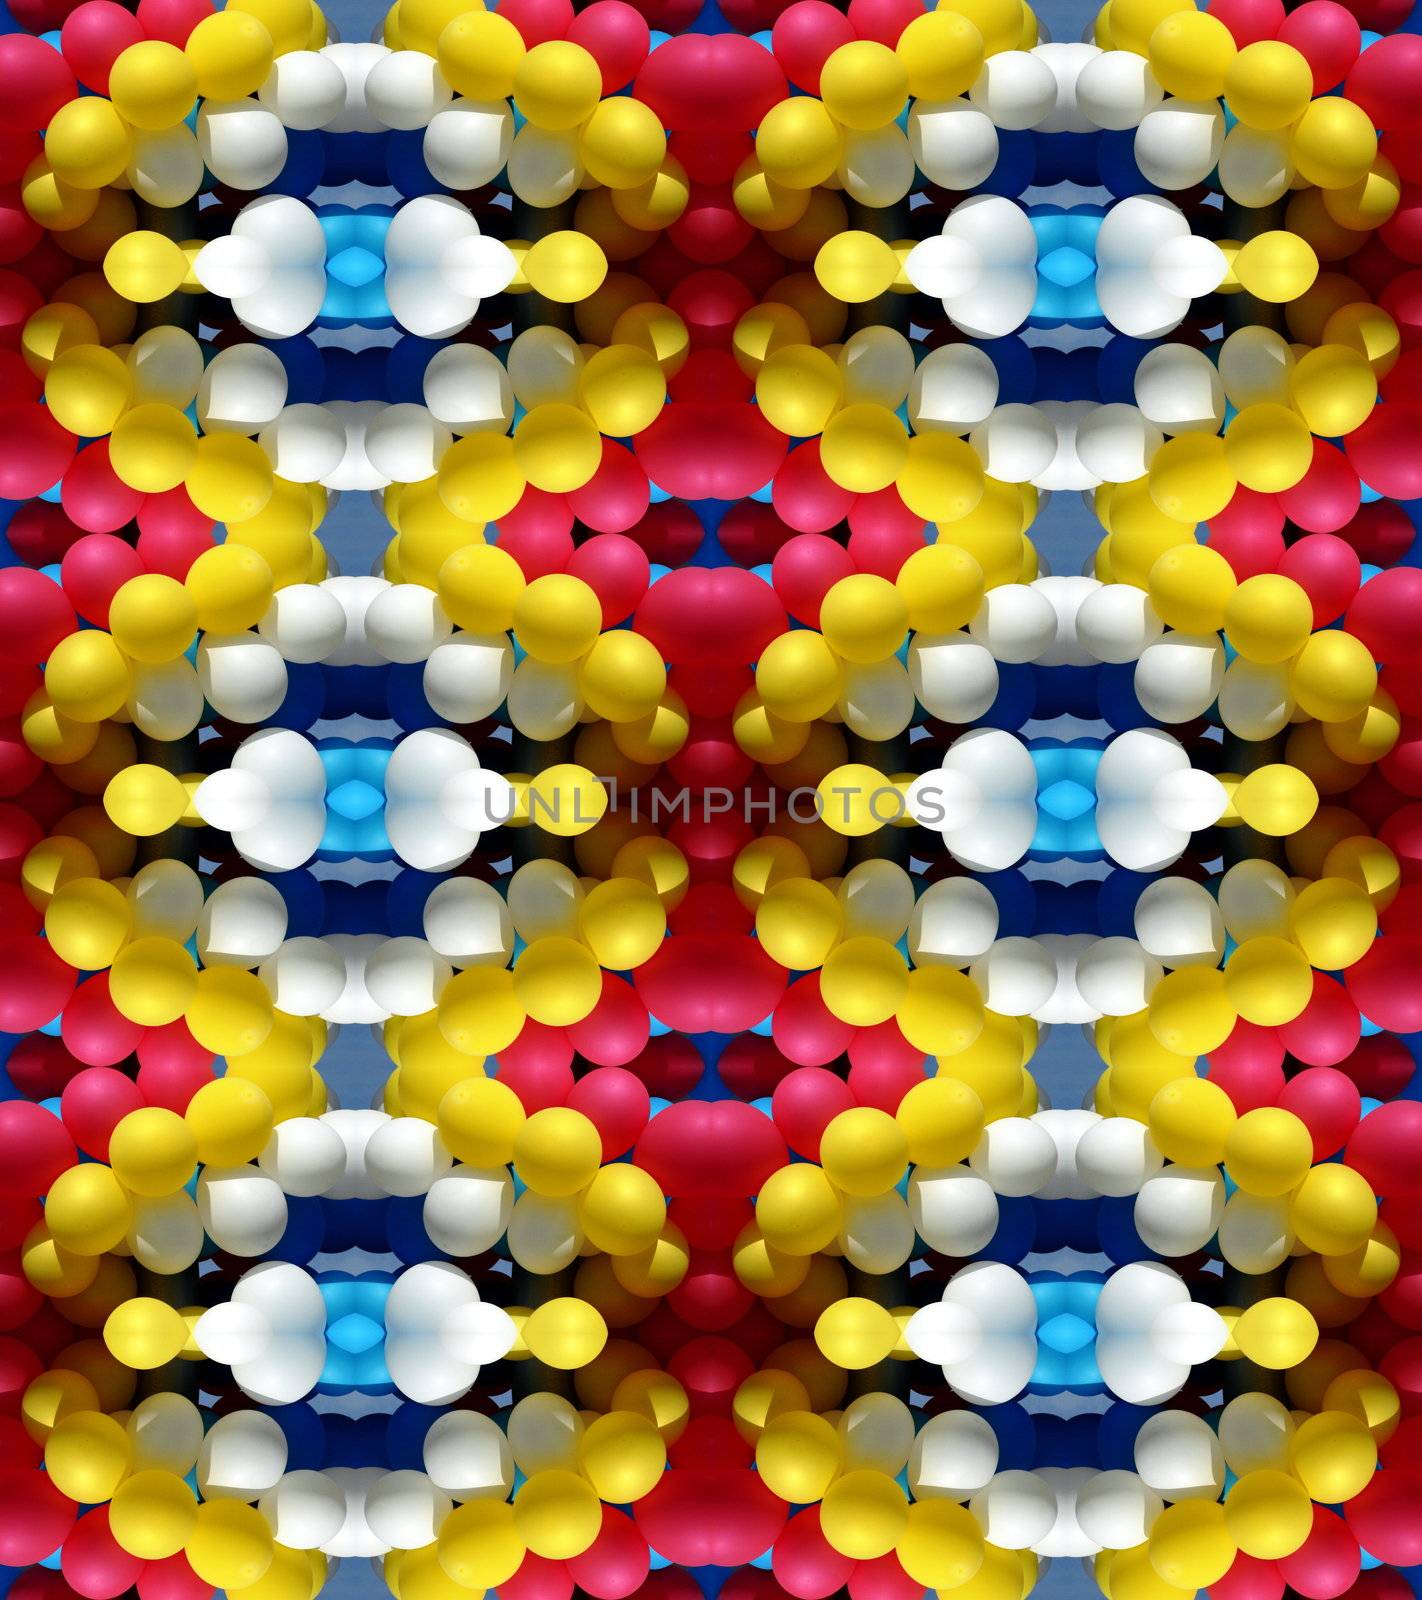 Series of the seamless natural patterns (balloons)